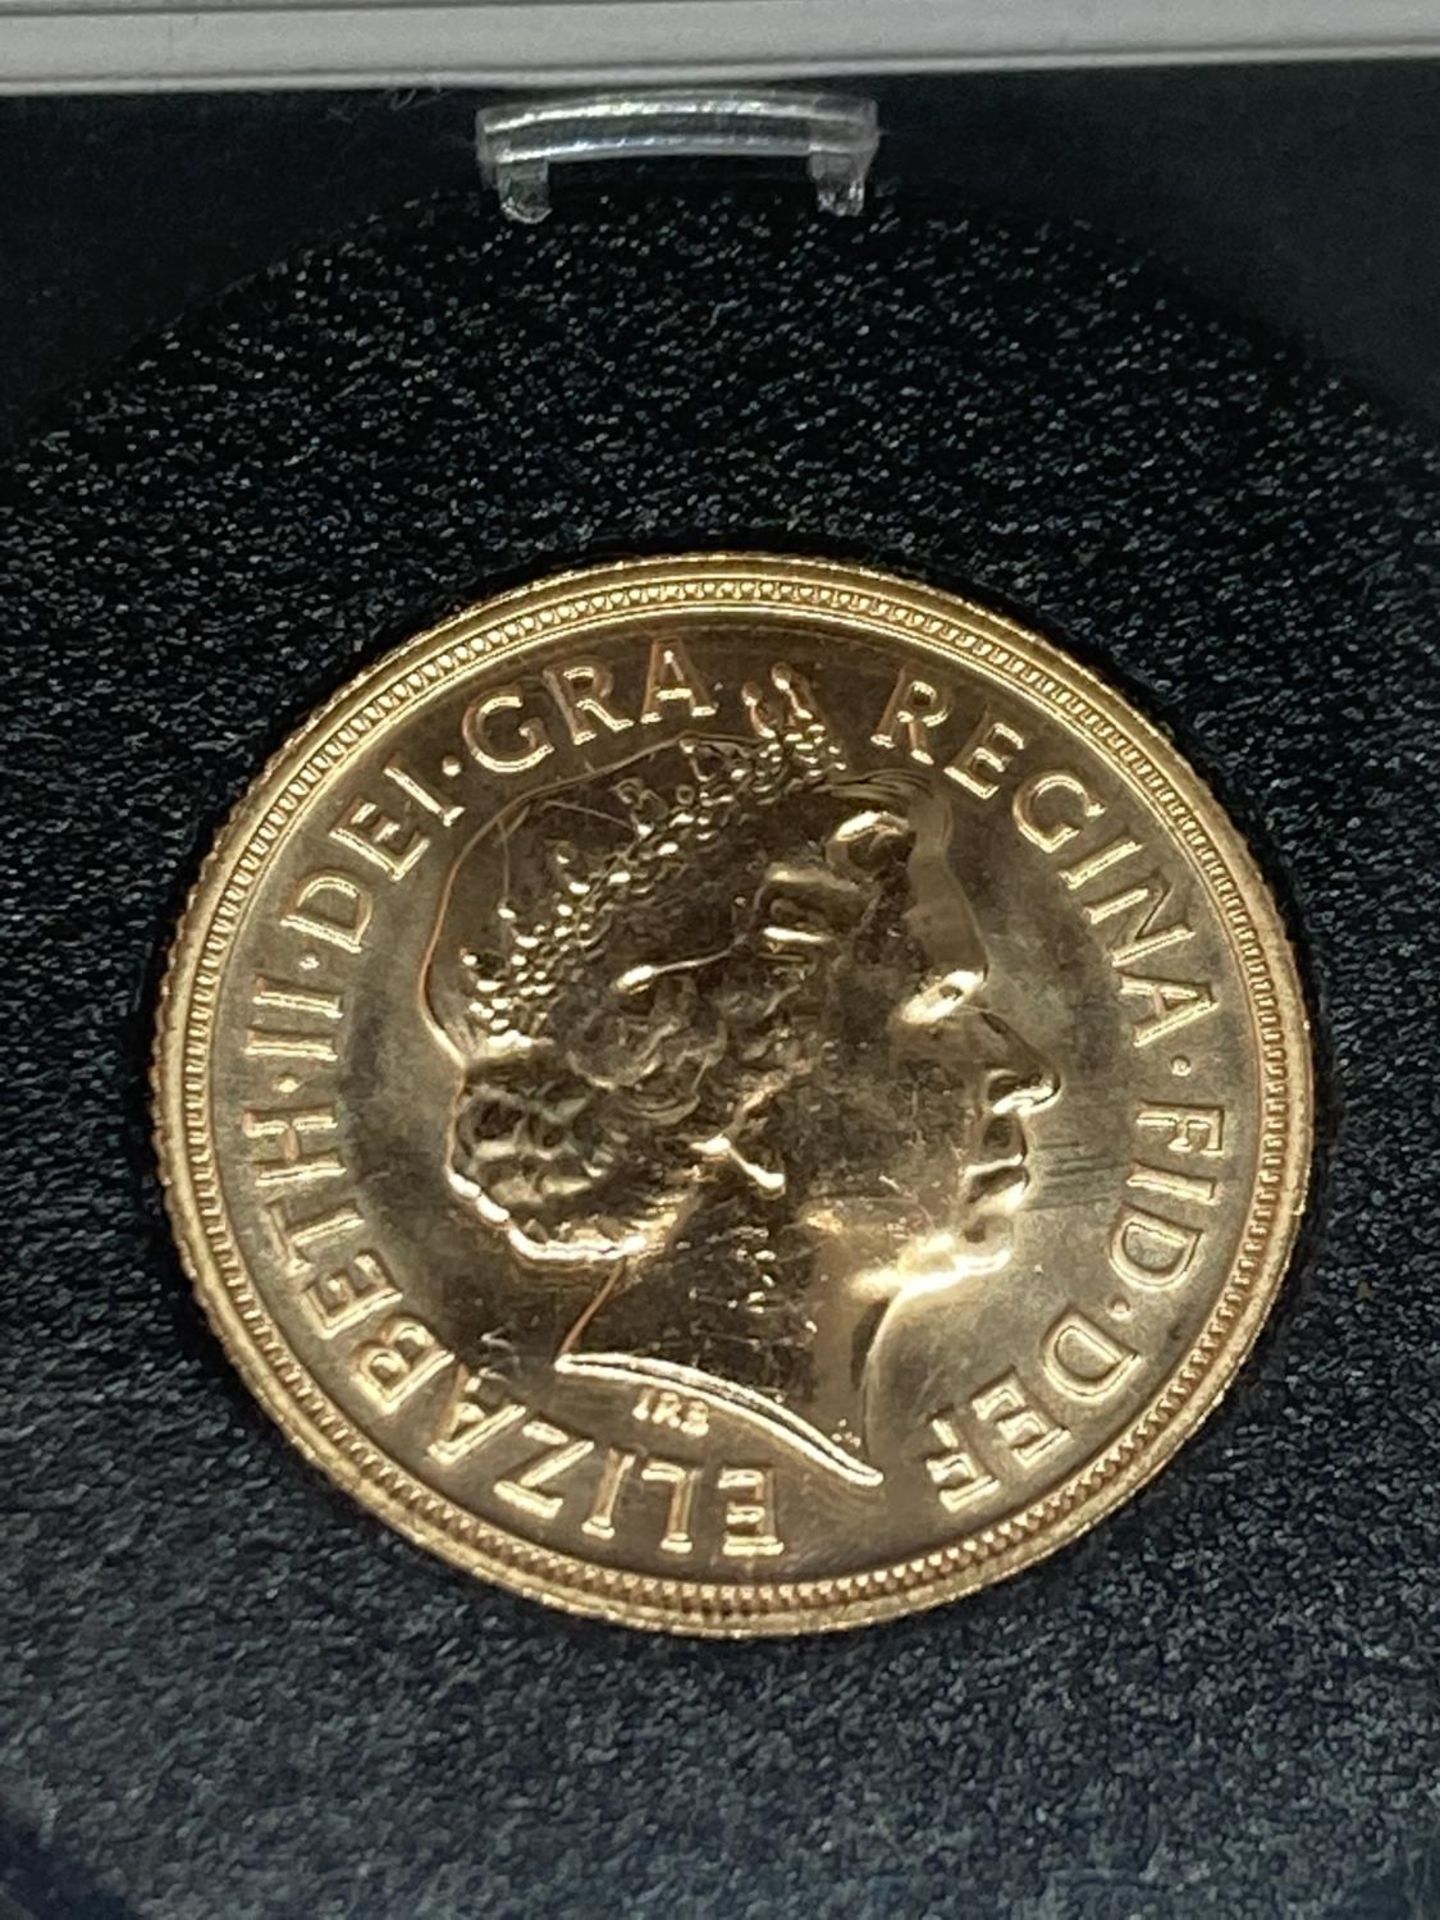 A 2013 GOLD SOVEREIGN WITH CERTIFICATE OF AUTHENTICITY - Image 3 of 3